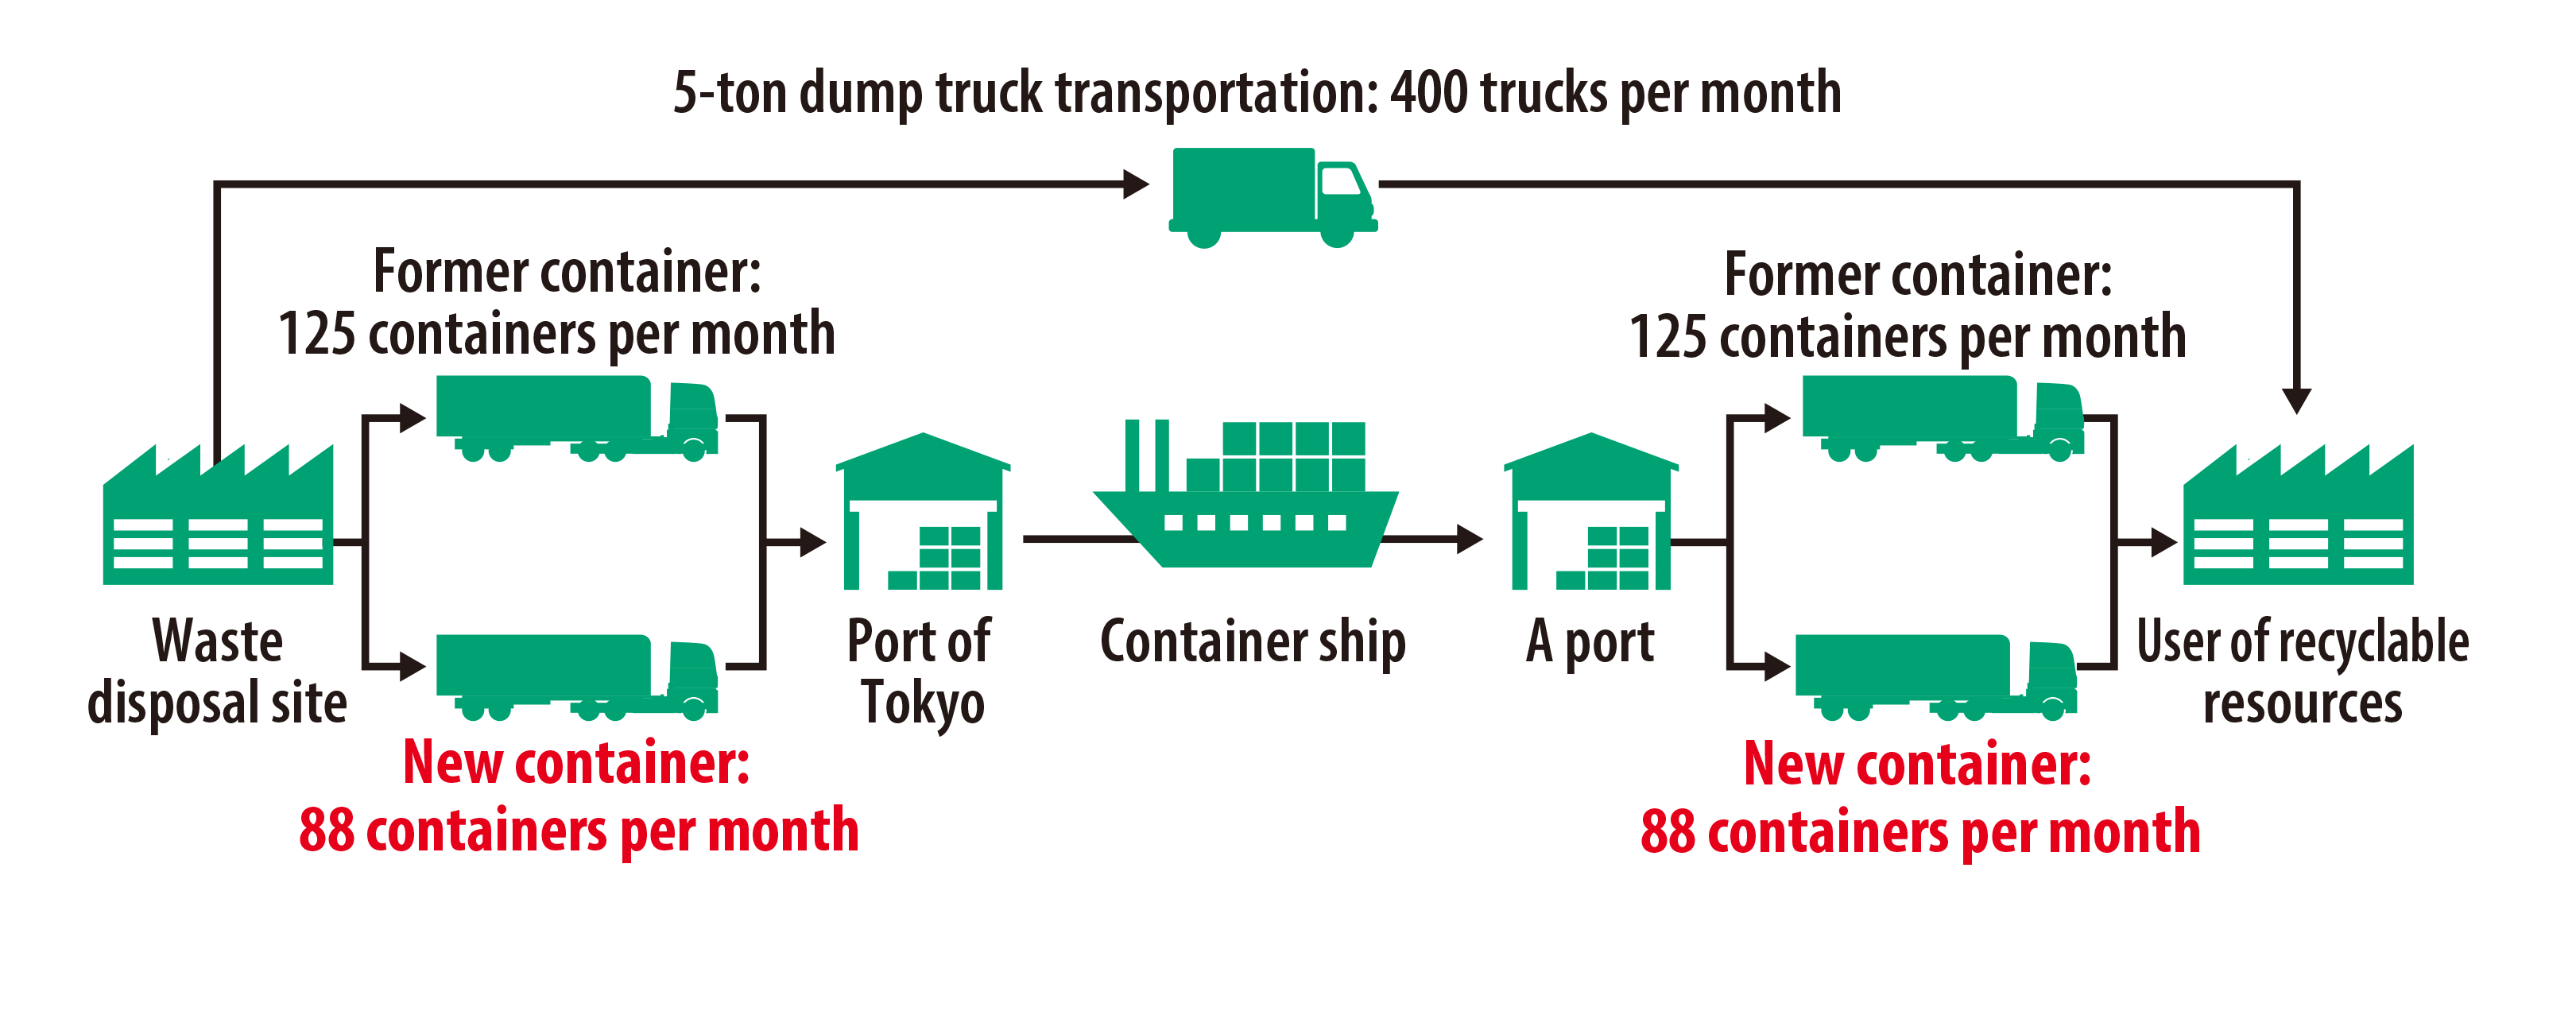 modal shift of recyclable resources waste transportation